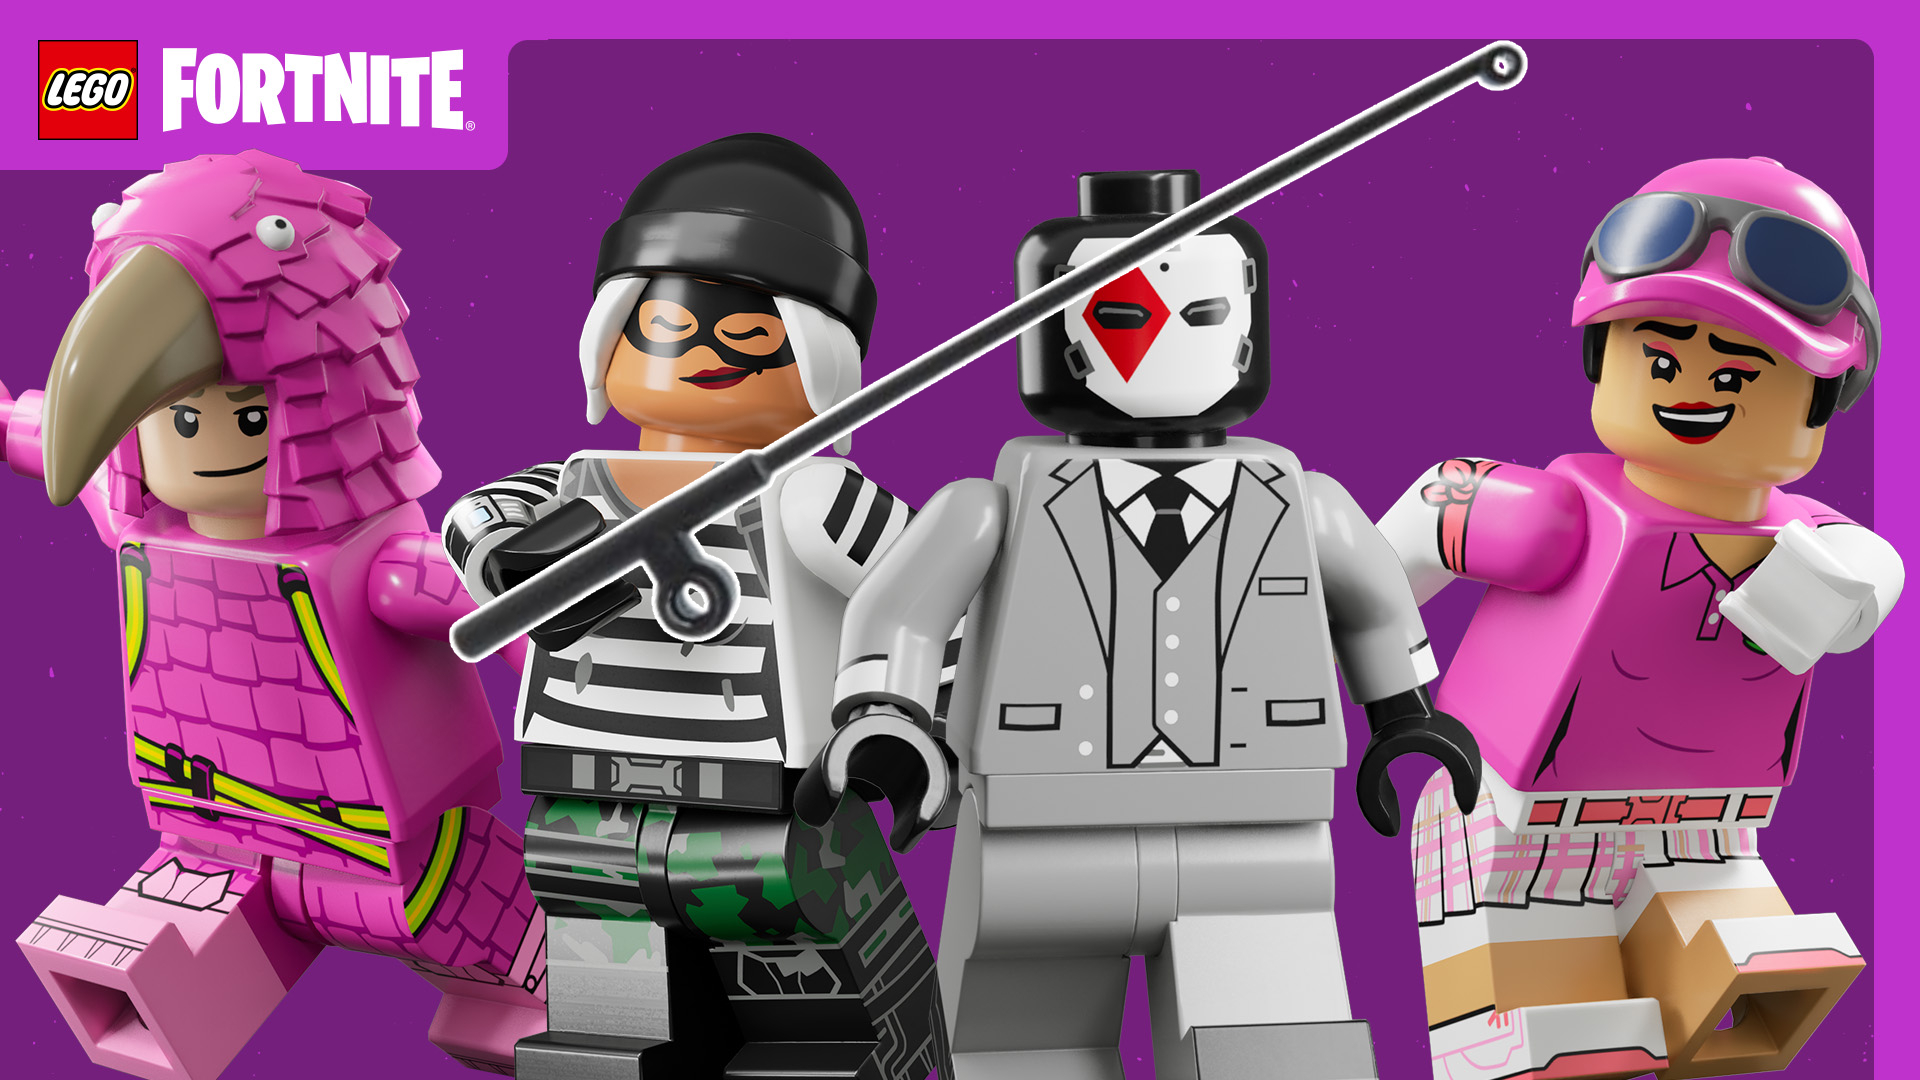 New LEGO Fortnite Update Will Introduce Fishing into the Game